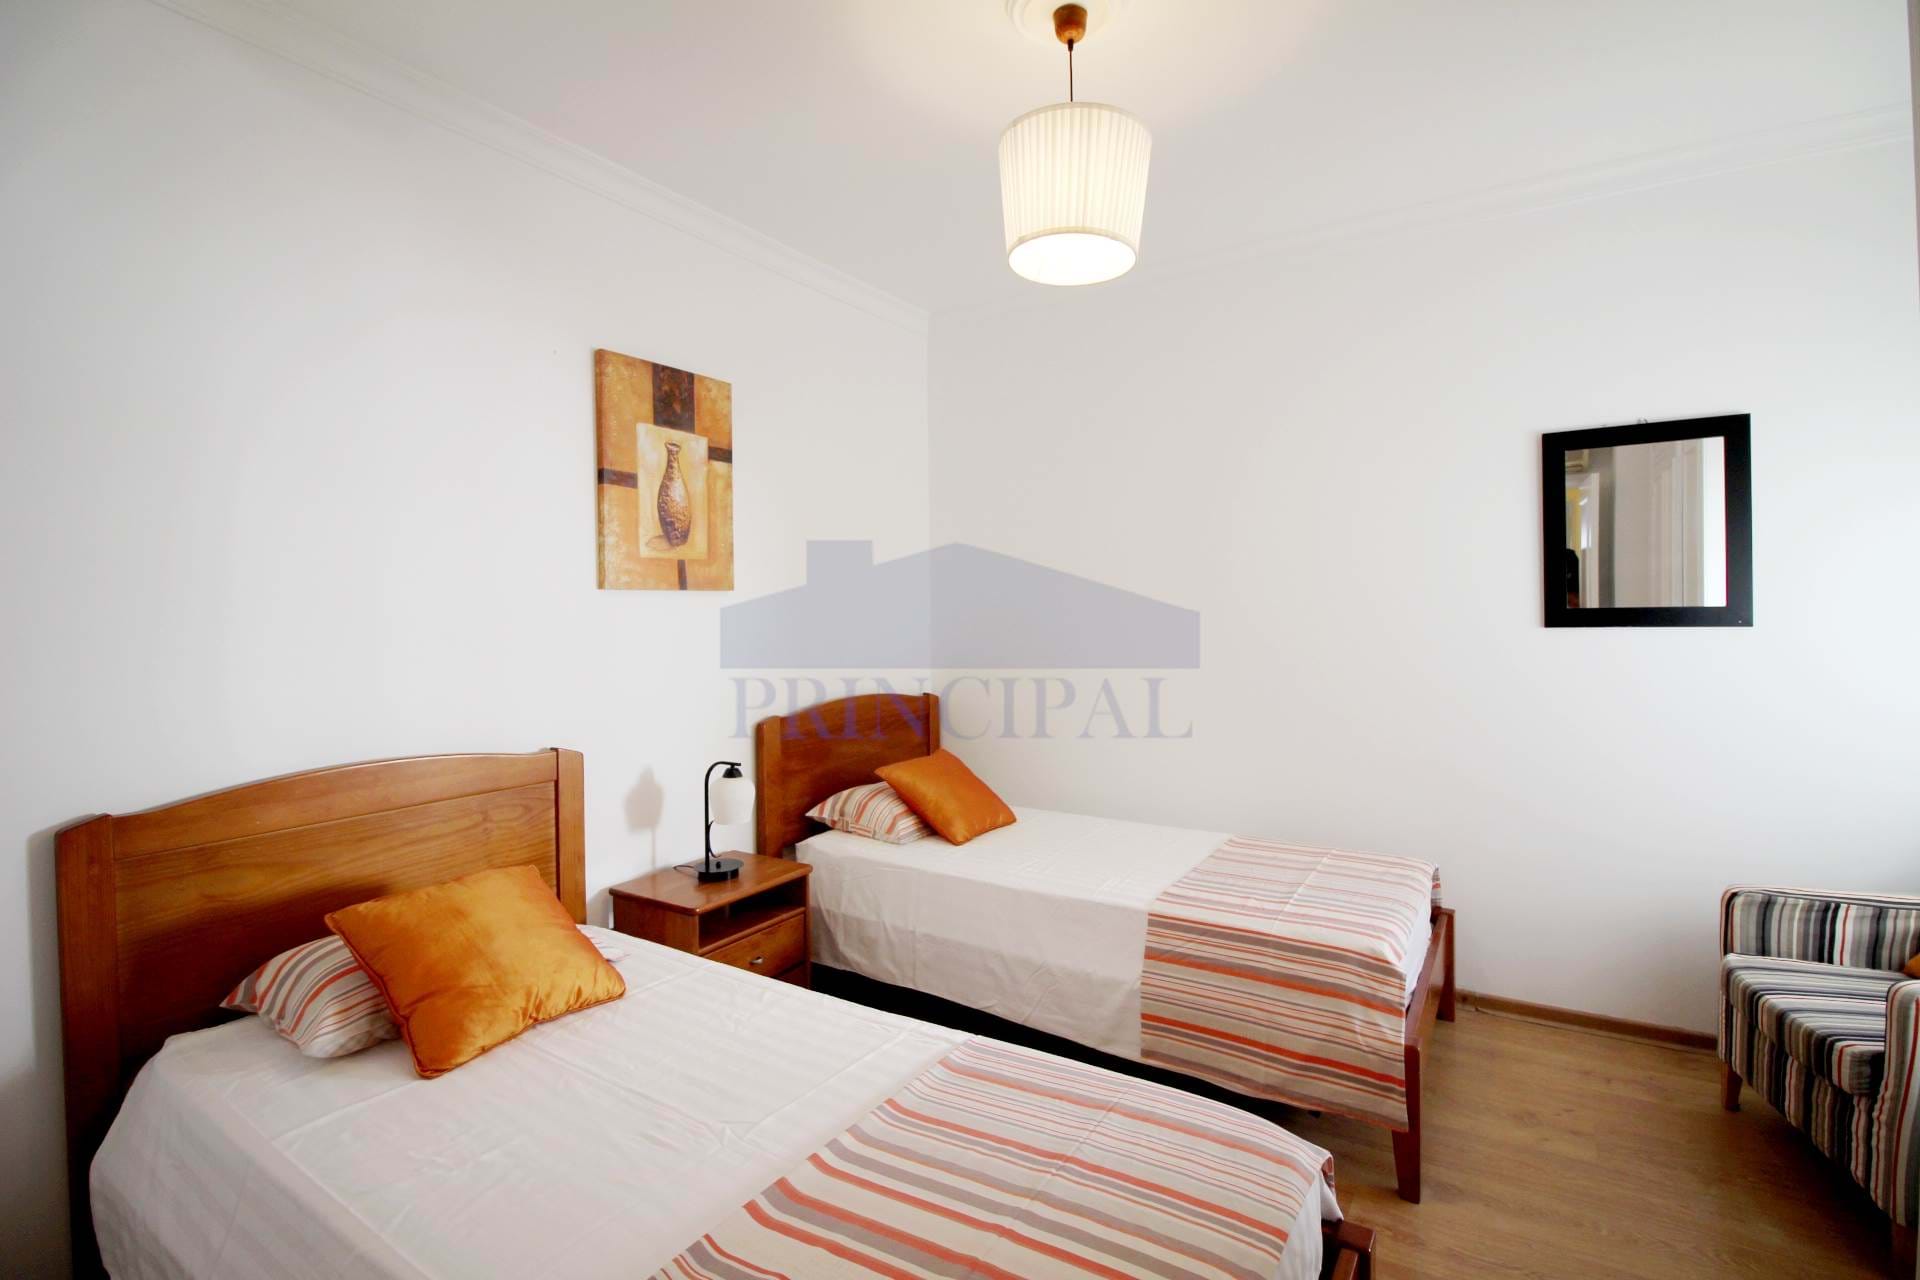 3 bedroom Apartment with garage, in the historic center of Albufeira